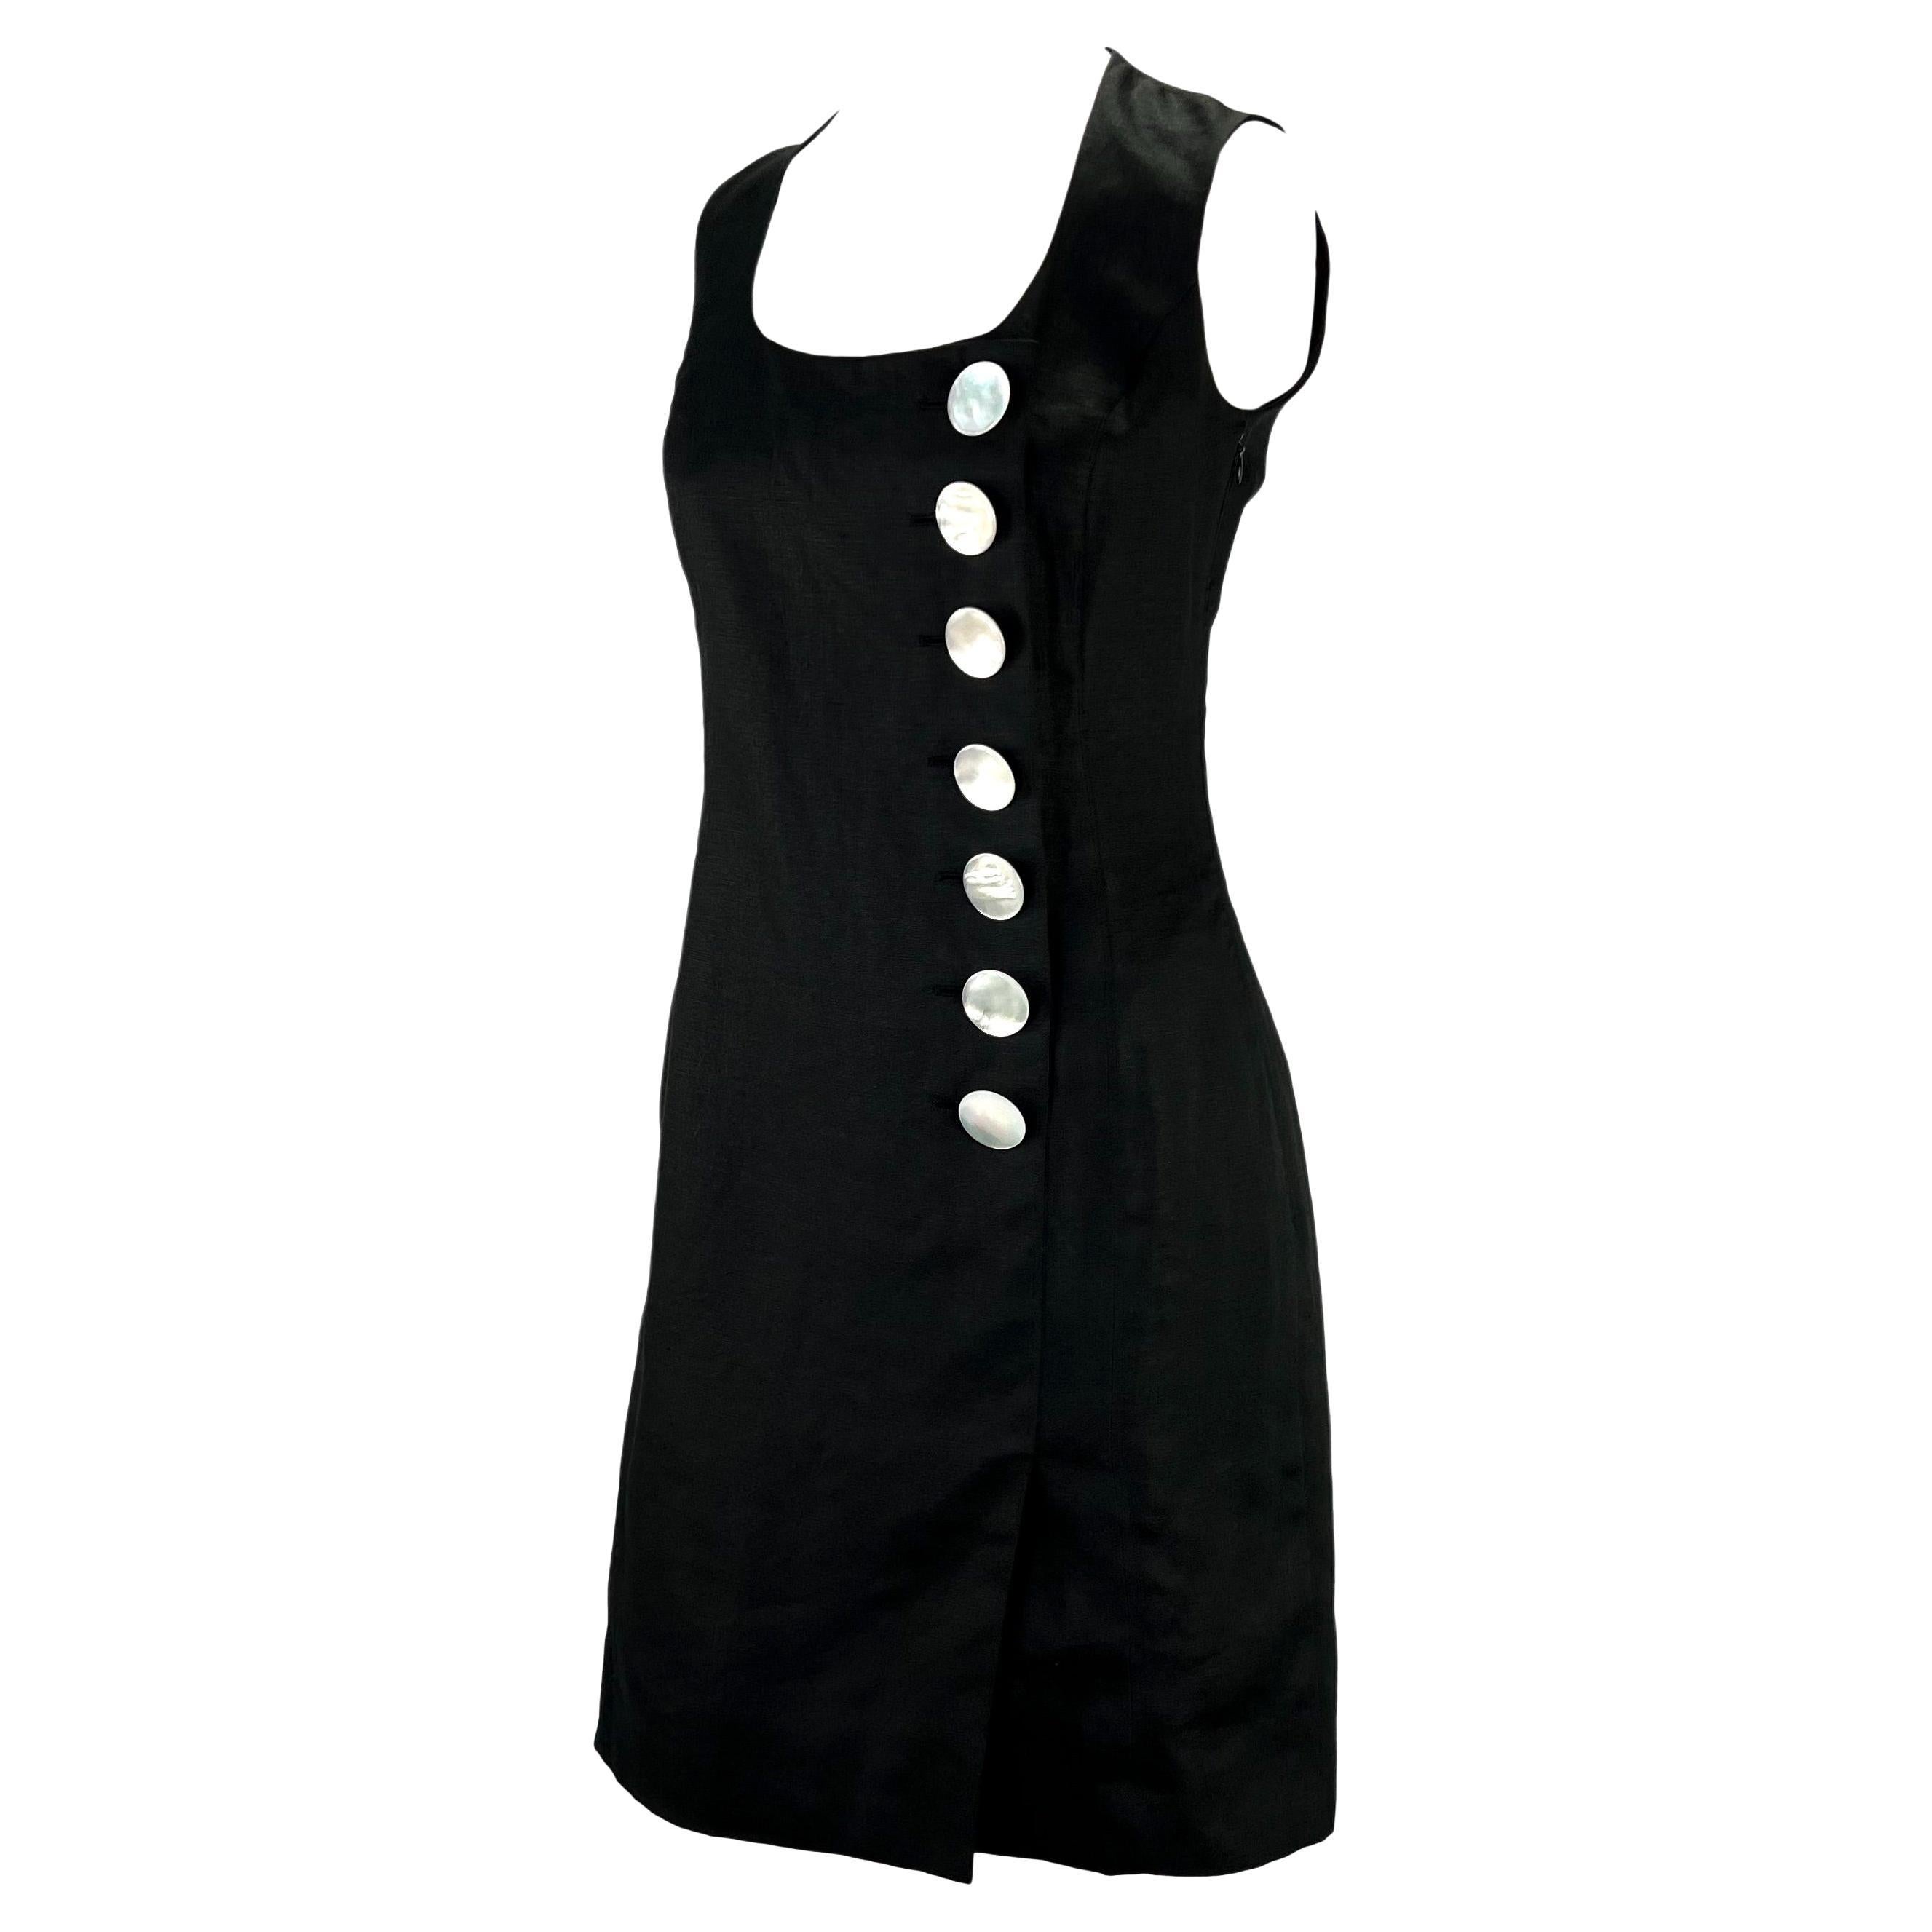 Presenting a black sleeveless linen Christian Dior Boutique dress, designed by Gianfranco Ferré. From the early 1990s, this classically beautiful dress features a wide scoop neckline and large mother of pearl accent buttons on the side. Effortlessly